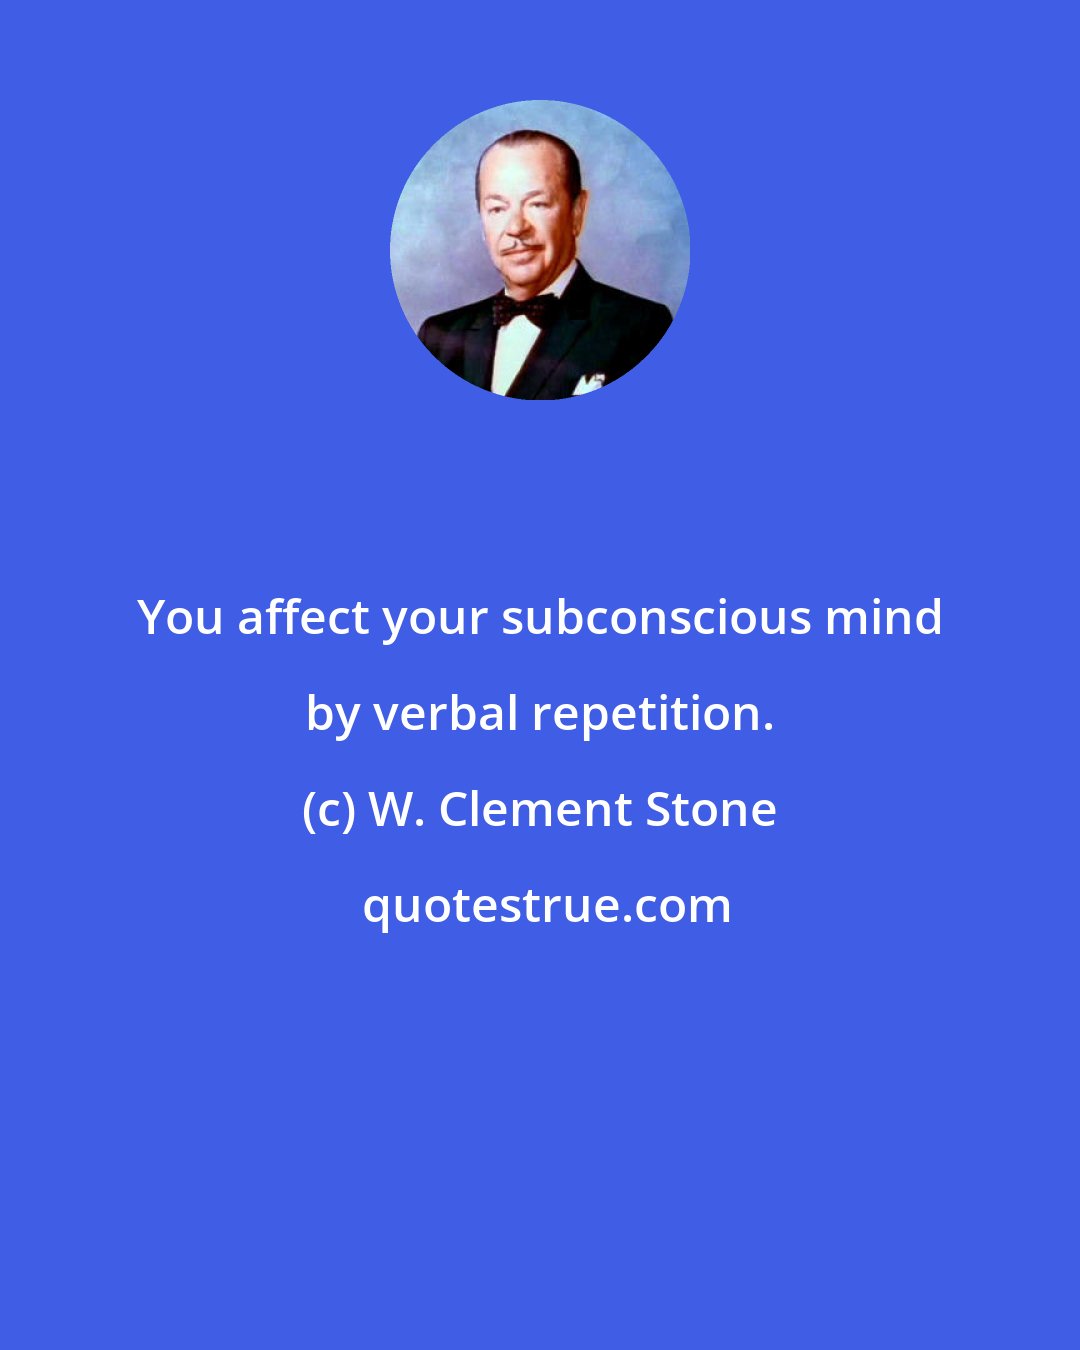 W. Clement Stone: You affect your subconscious mind by verbal repetition.